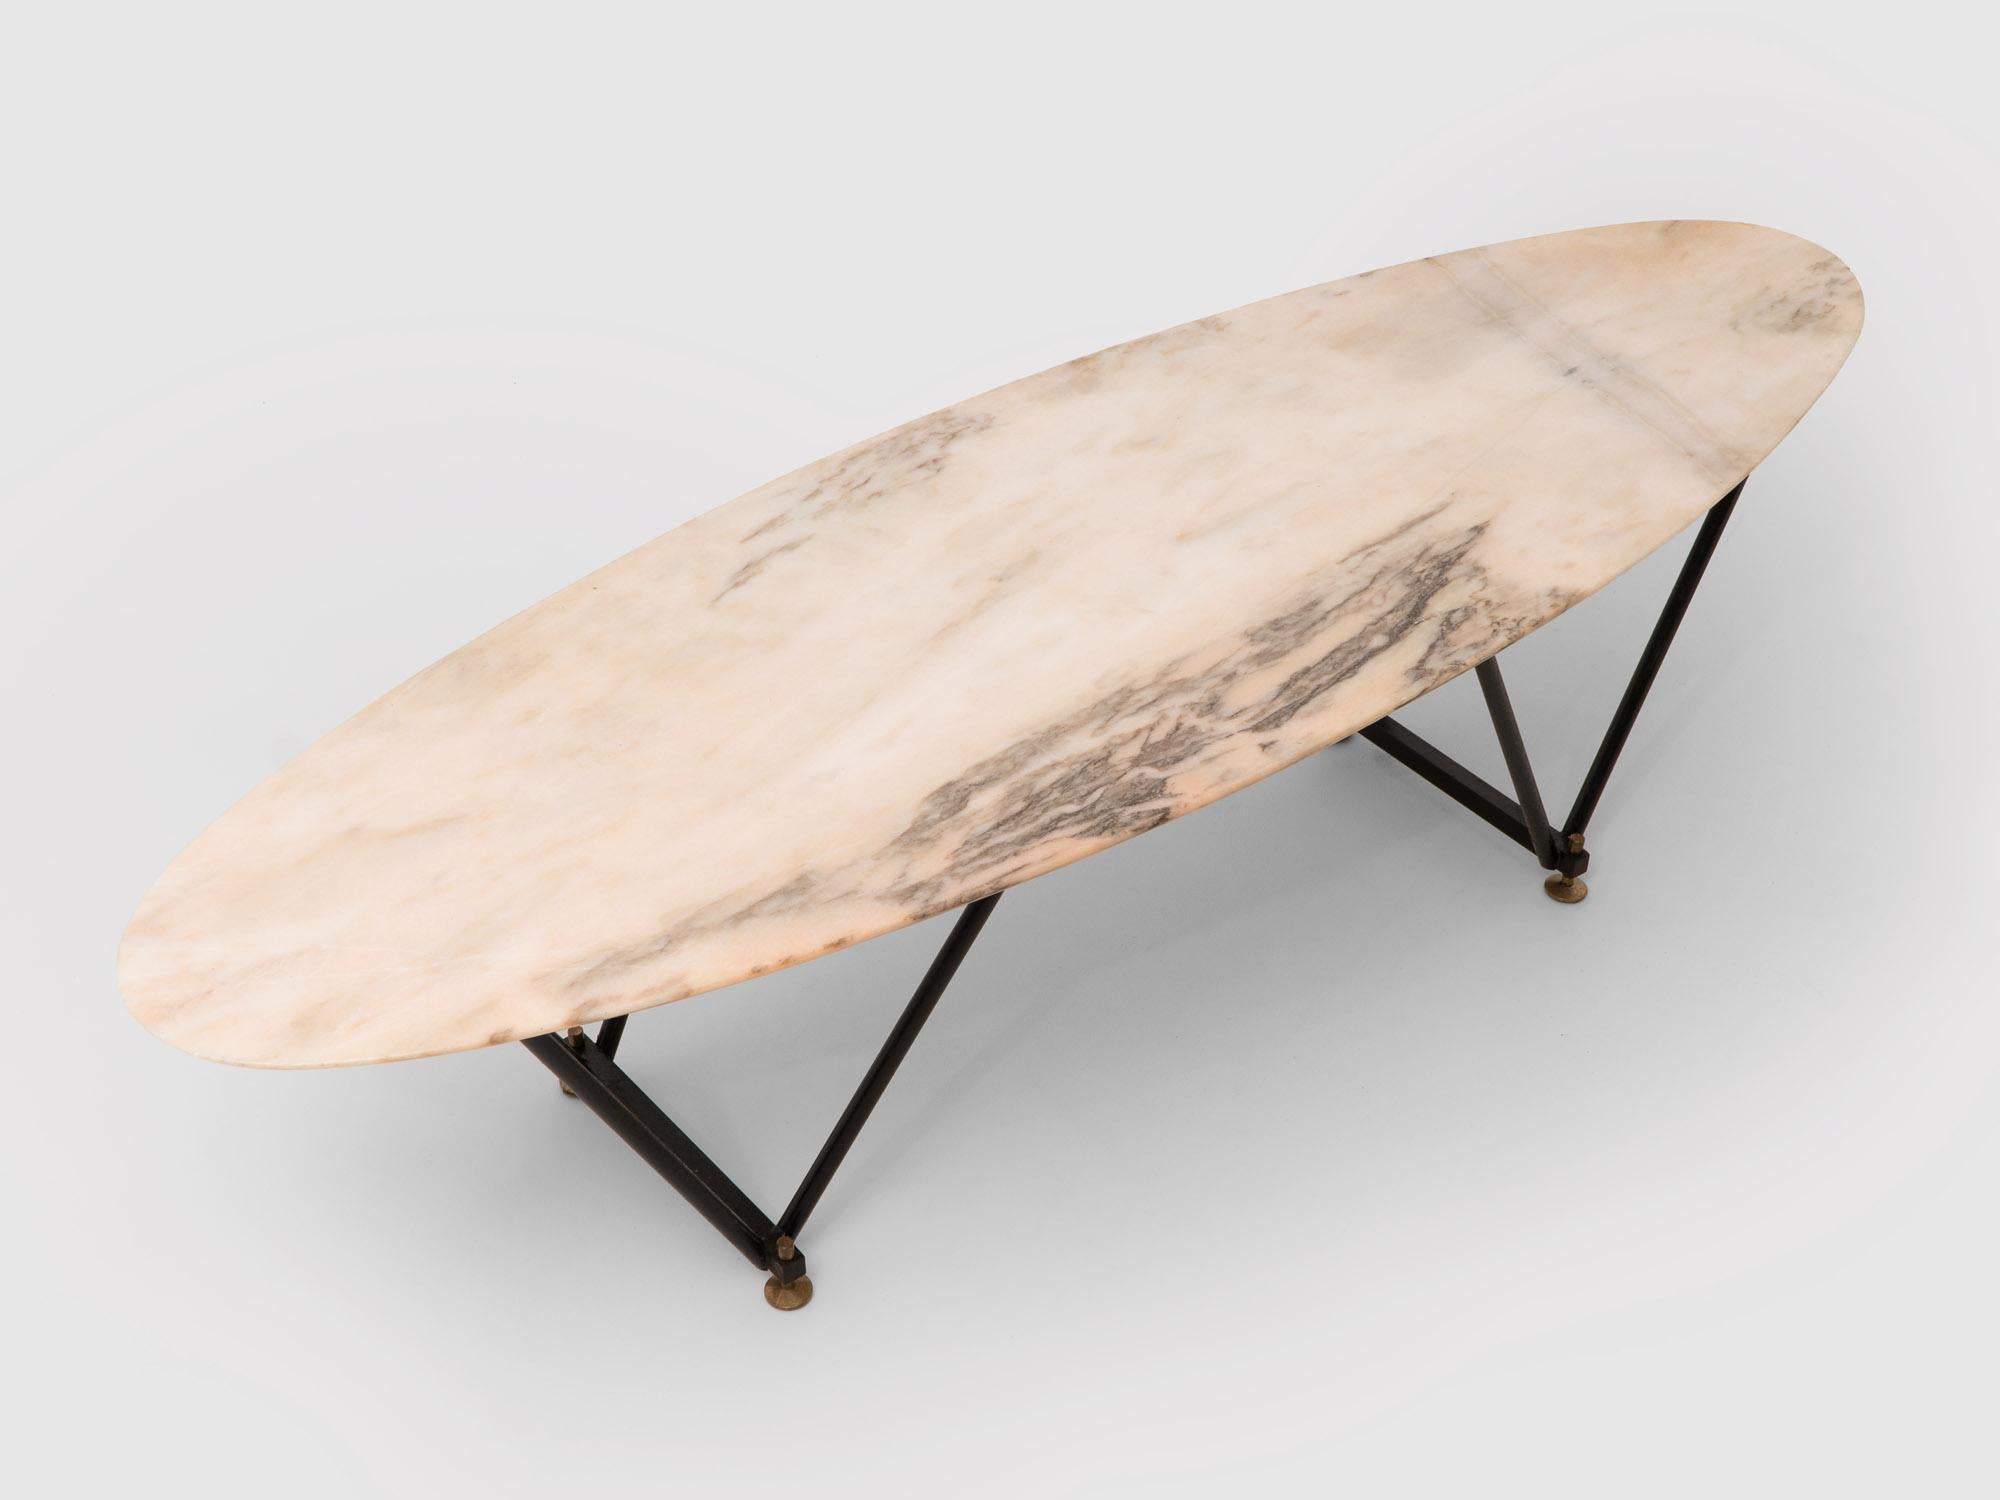 Italian marble coffee table, surfboard shape, steel base with brass ends. Original condition, small chip to the marble top.